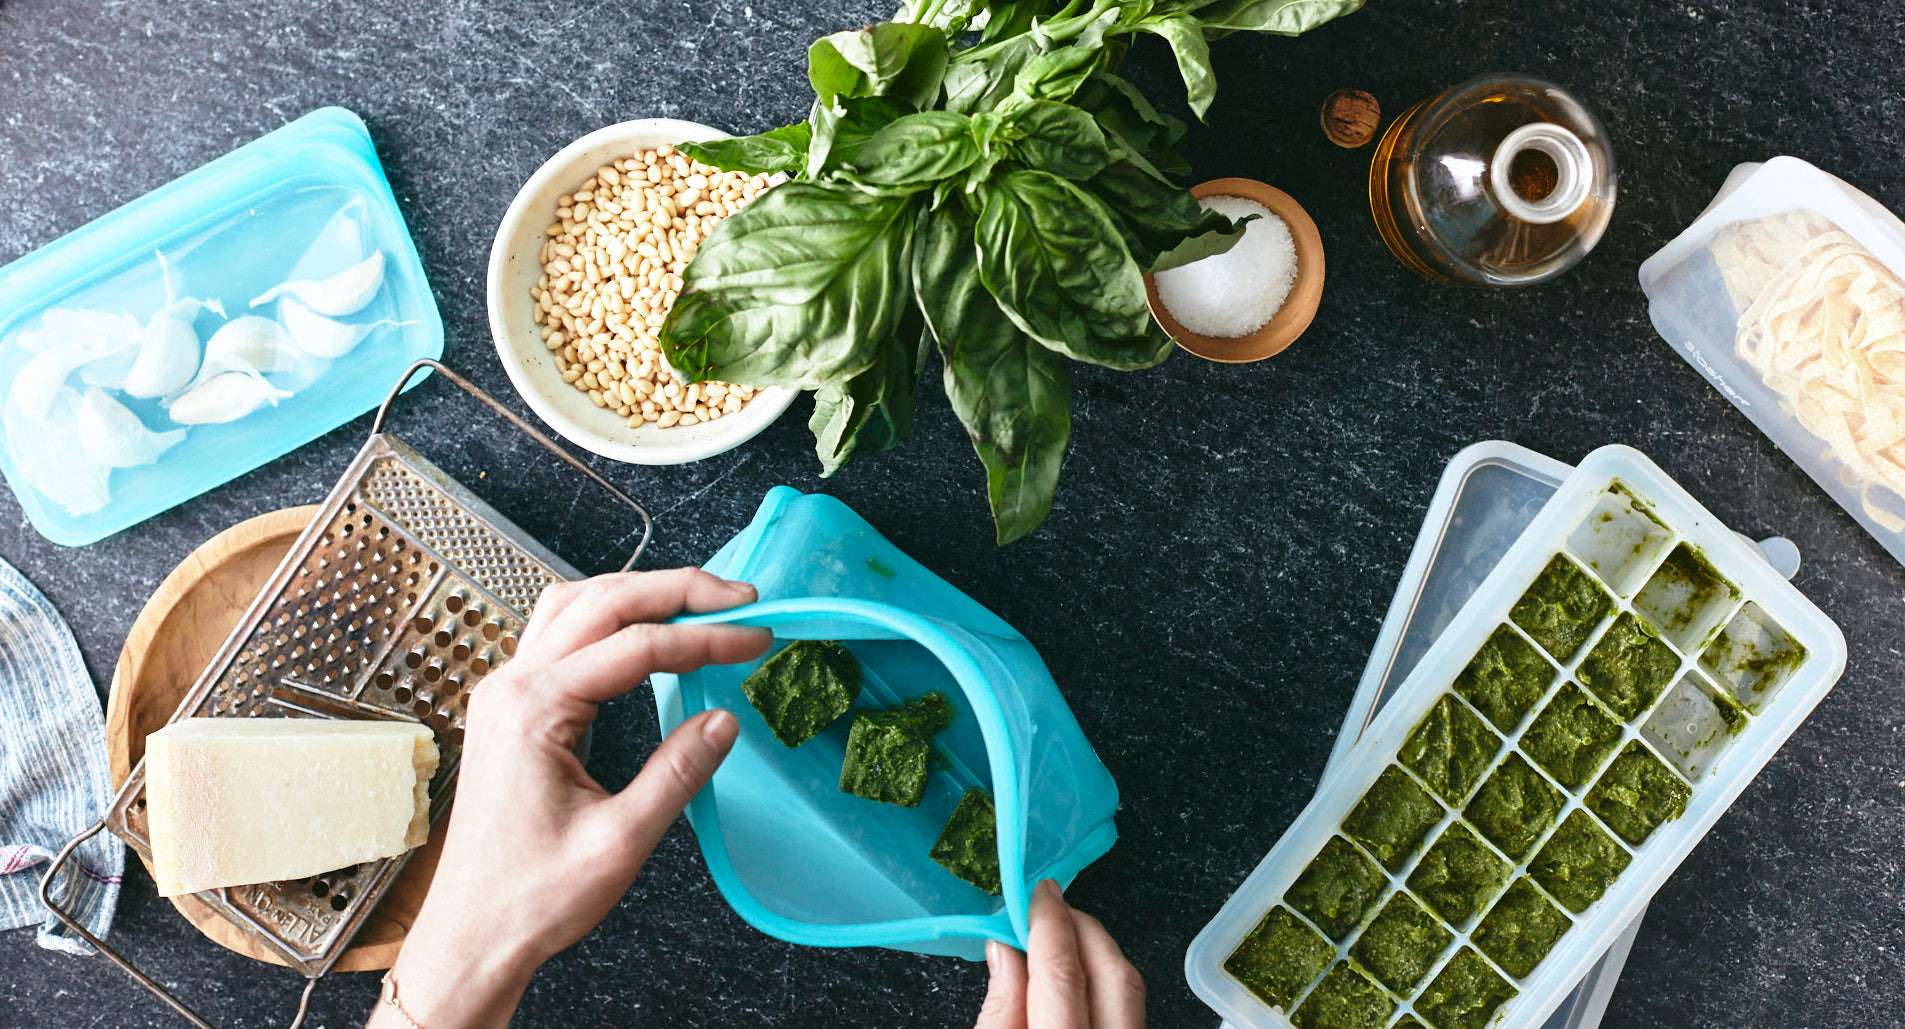 How to Store Herbs and Keep Them Fresh for Longer